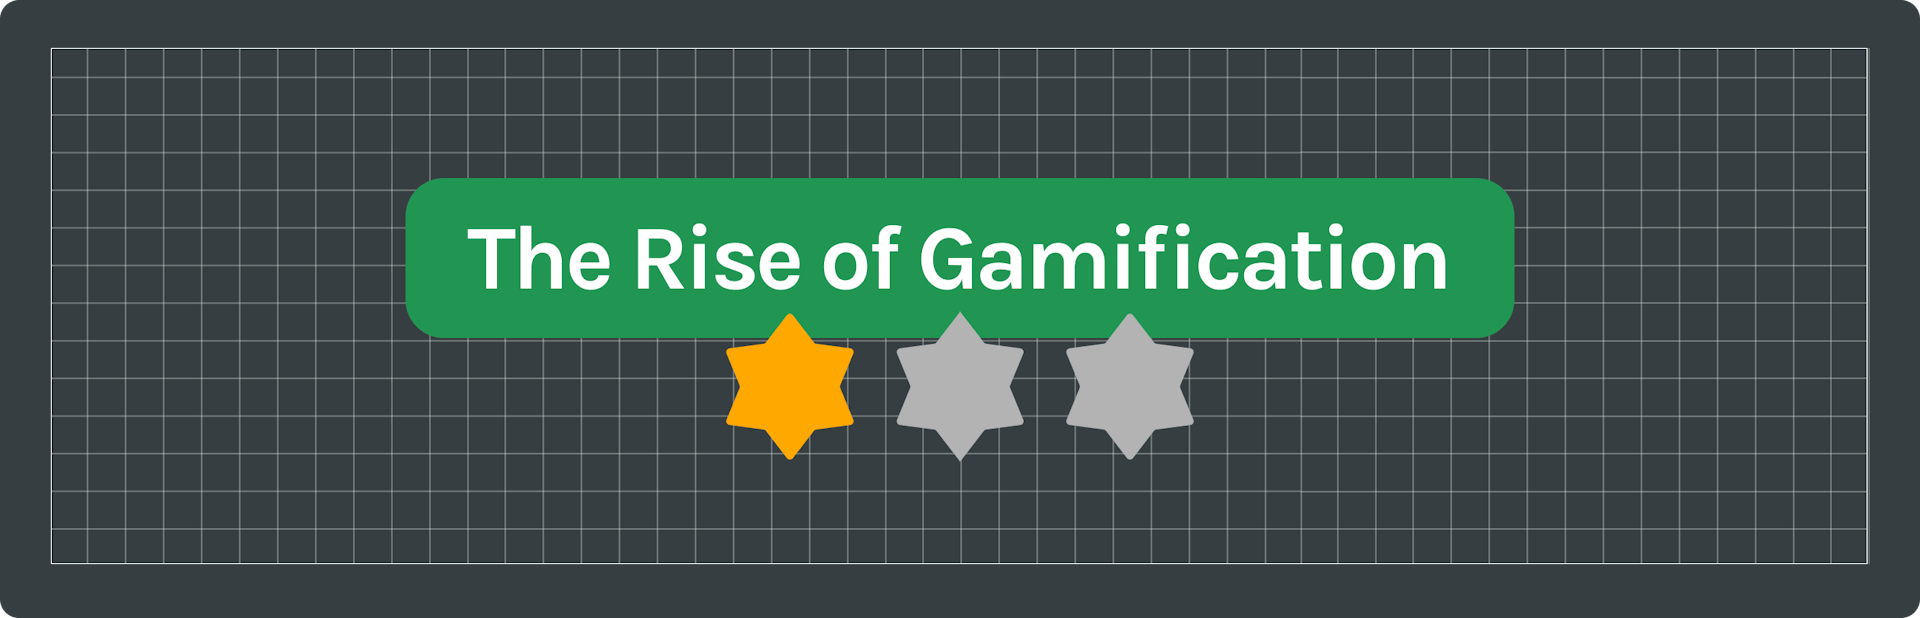 text saying "the rise of gamification"  with one yellow star and two grey stars